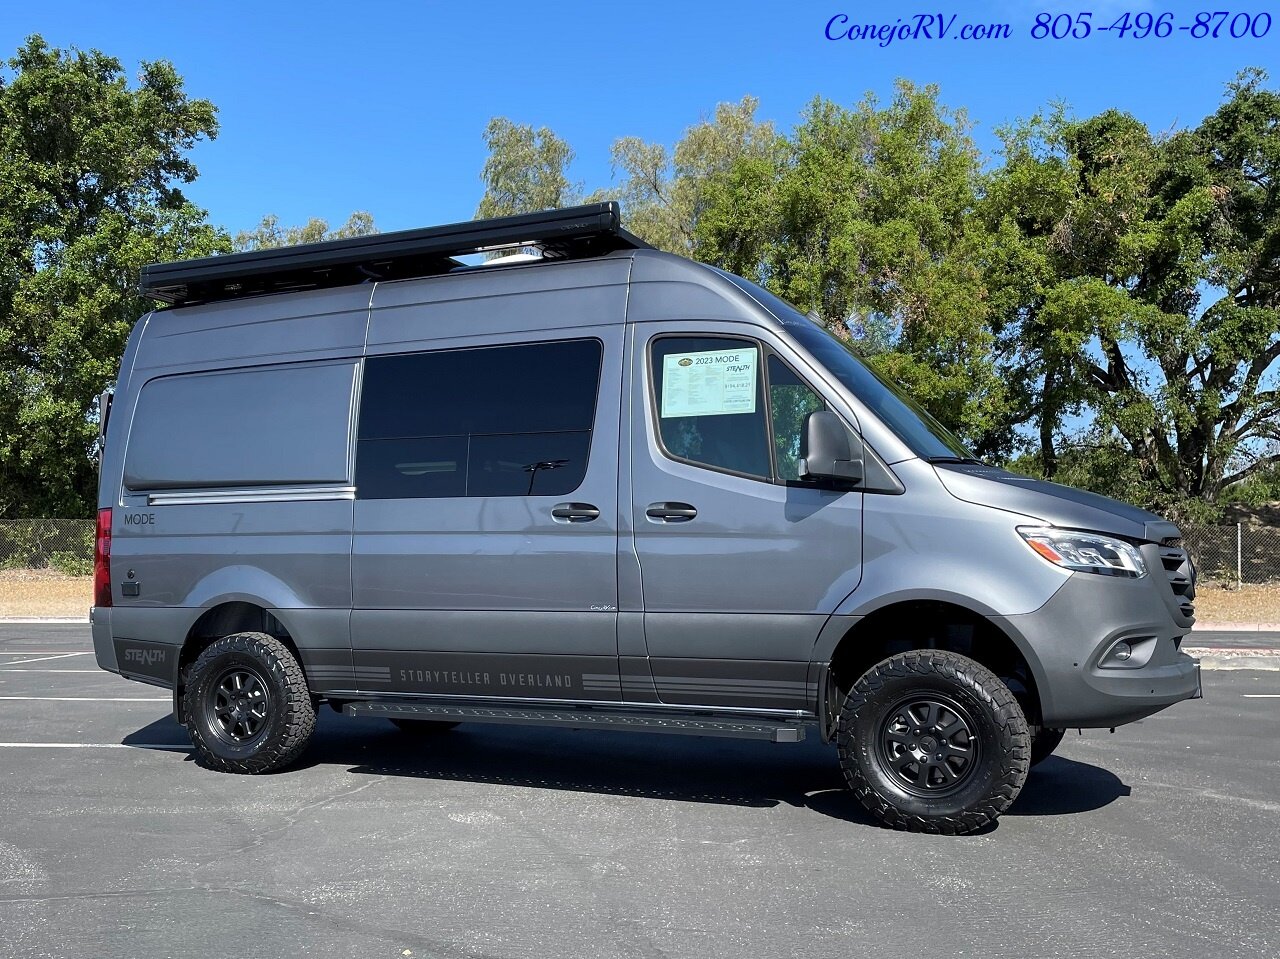 2023 Storyteller Overland Stealth Mode AWD DEALER DEMO 4 cyl H.O.with 9 Speed  Transmission - Photo 3 - Thousand Oaks, CA 91360